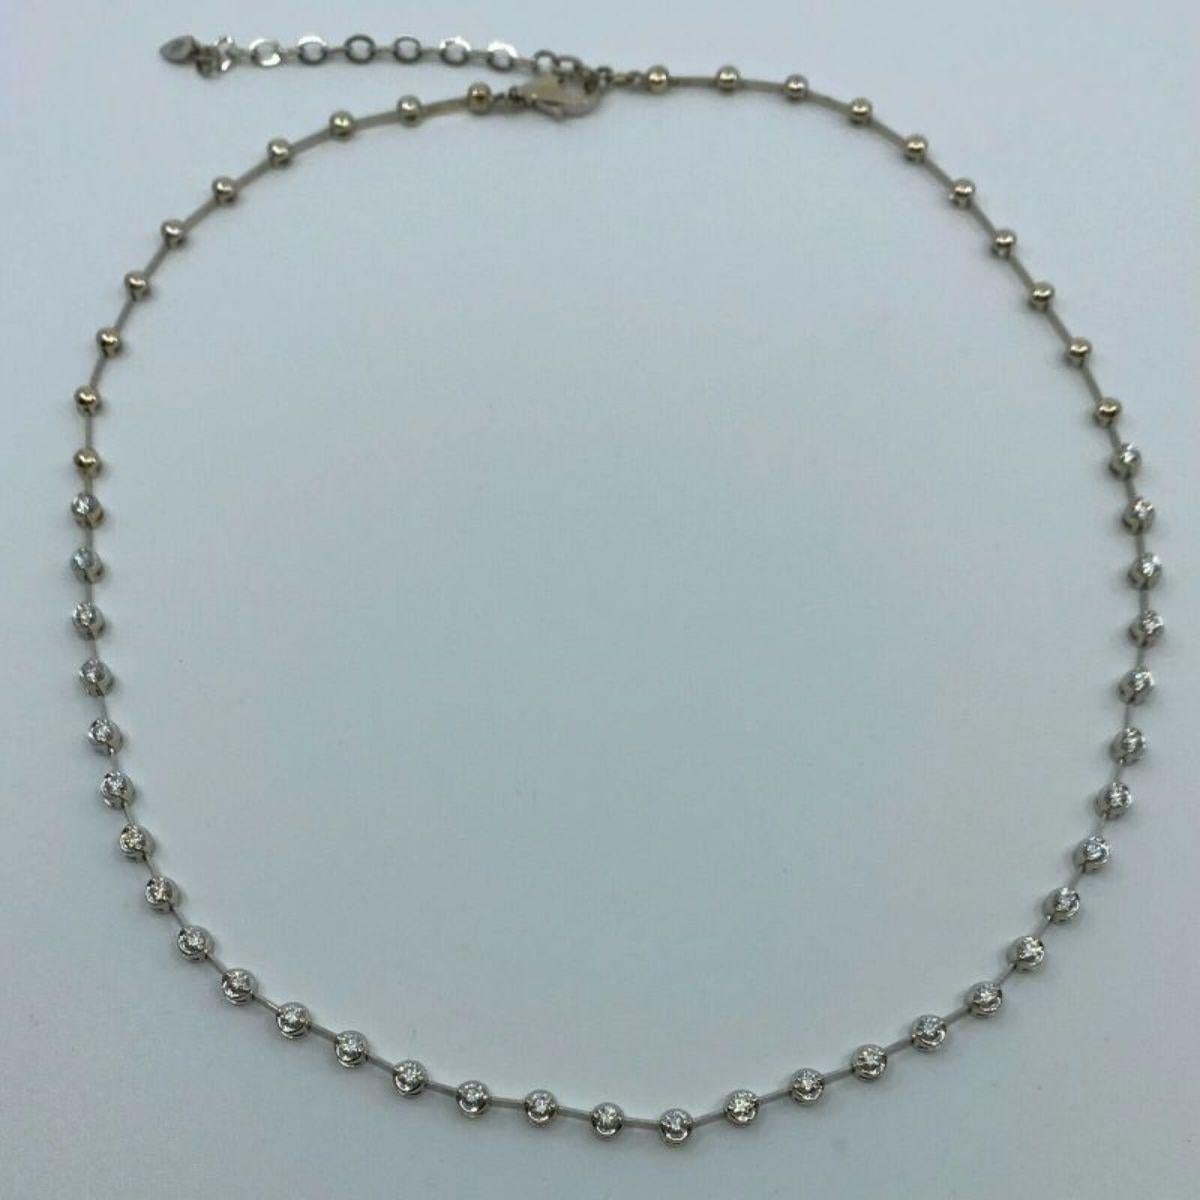 1.60ct Natural Diamond Round Cut 18K White Gold Line Tennis Necklace

18 Karat White Gold Natural Diamond Line Tennis Necklace. 
1.60 total carat of diamonds measuring 2.5mm Si1/2 clarity G/H colour. 32 stones total. 
Set in a beautiful 18k white